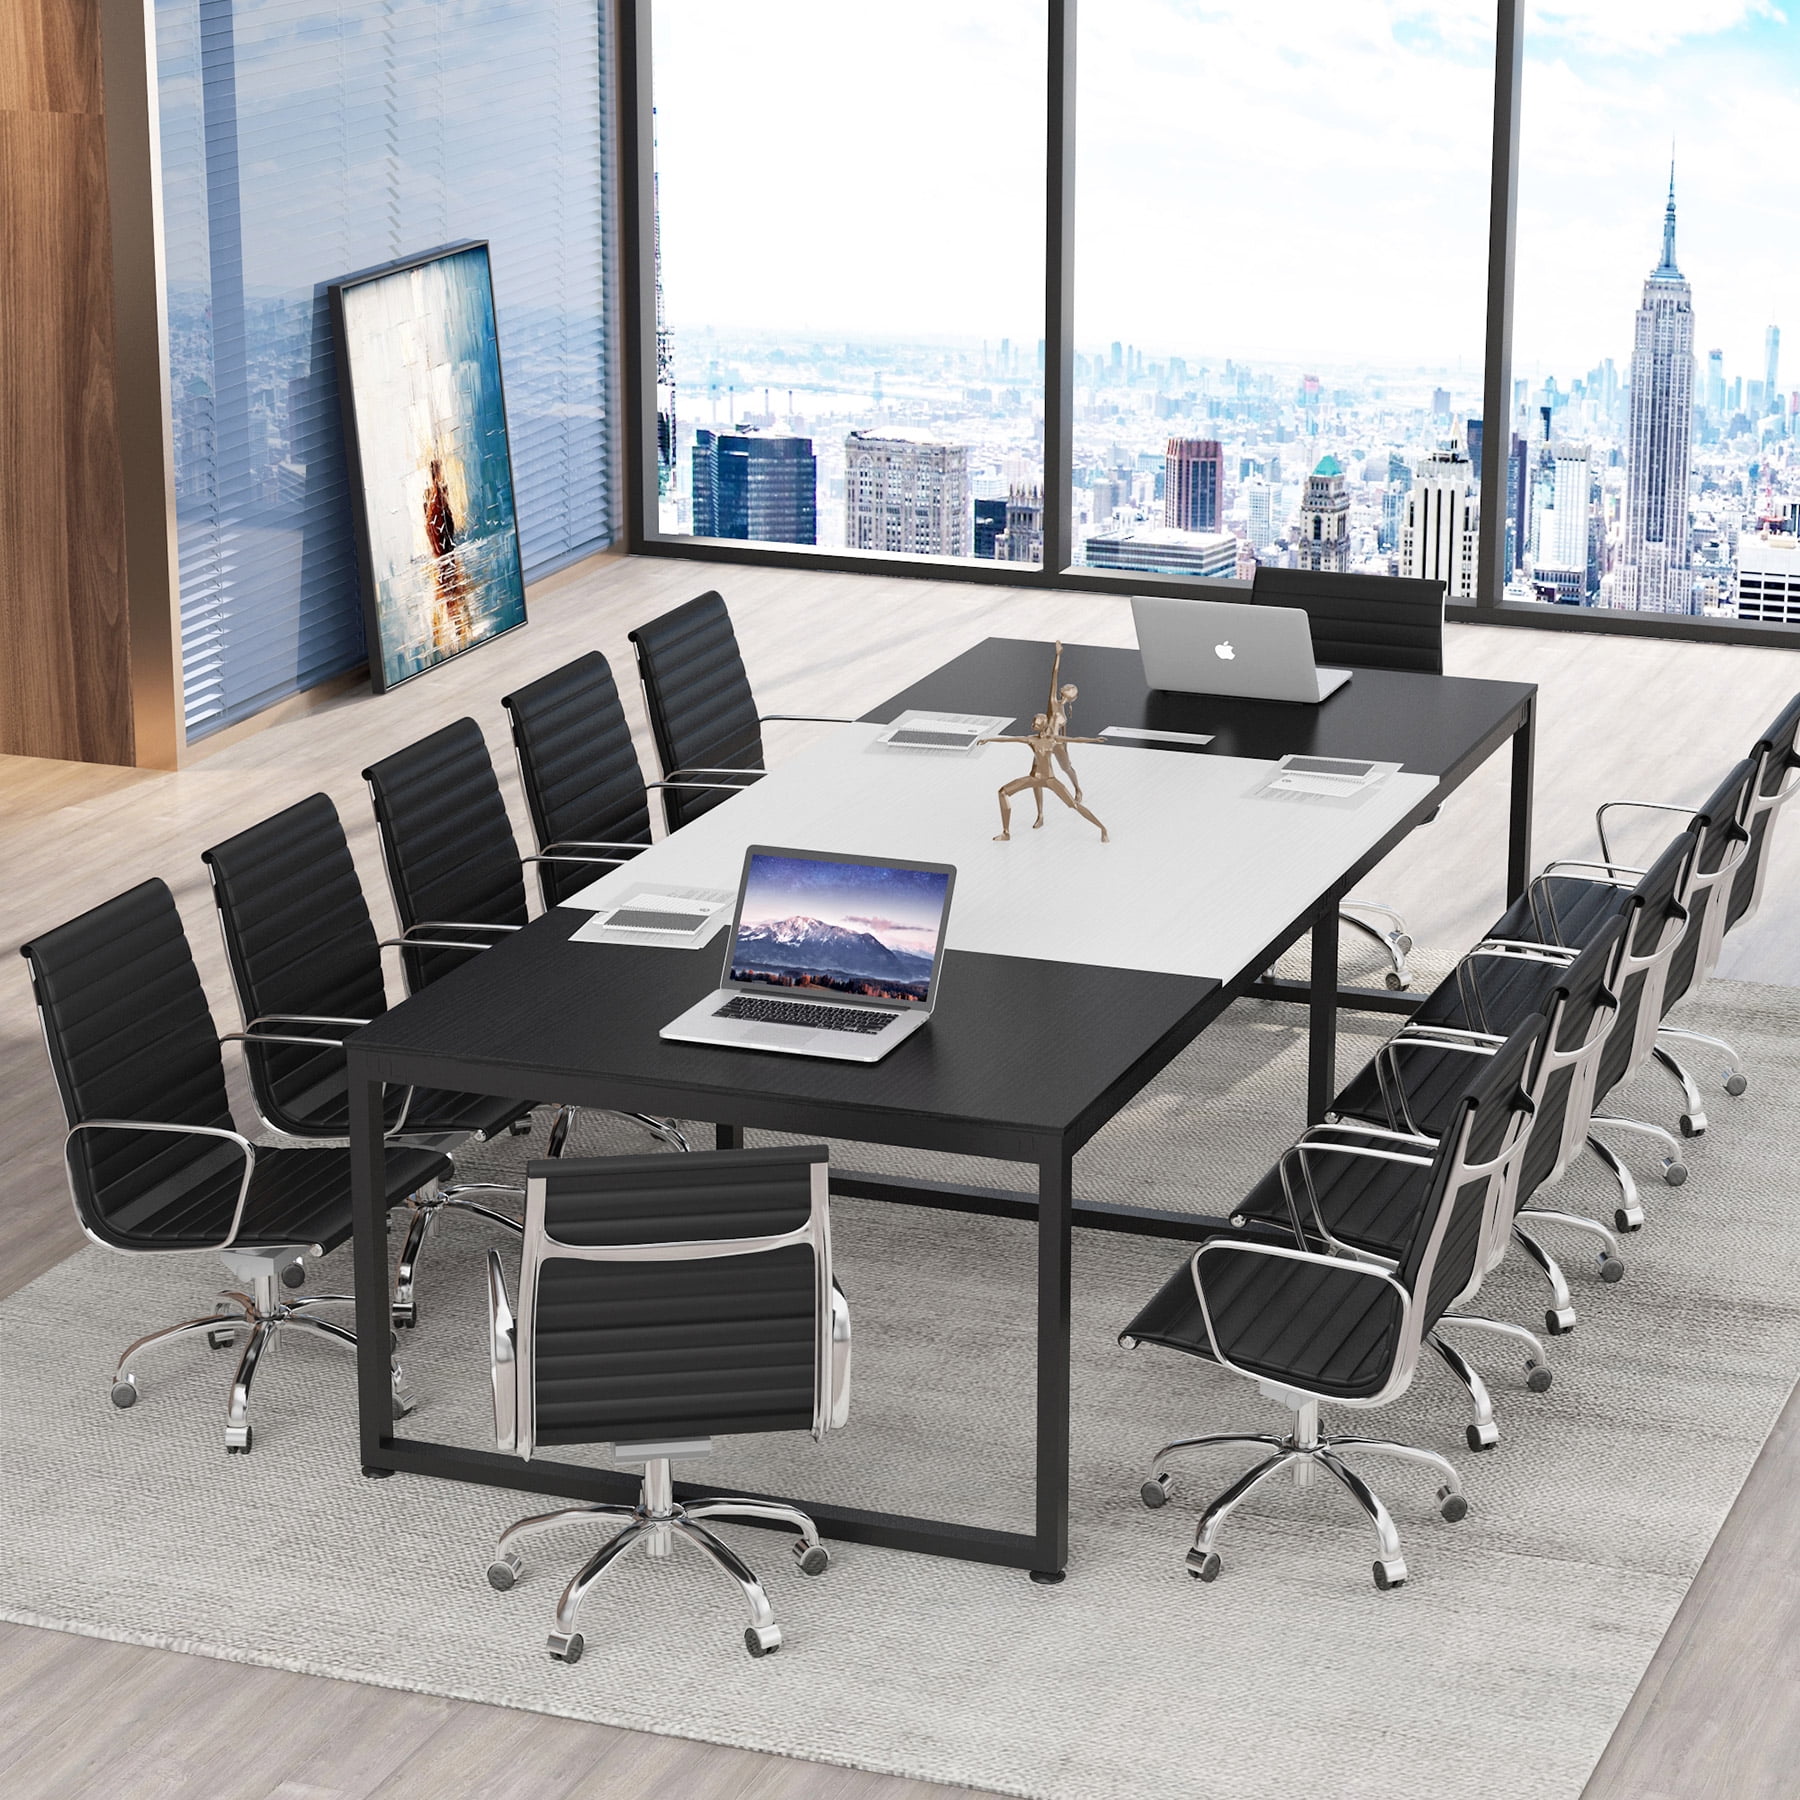 Seats 12 Diamond Series 12FT Rectangular White Laminate Conference Table with Silver Metal Base 142.5 L x 47.25 W x 30 H 